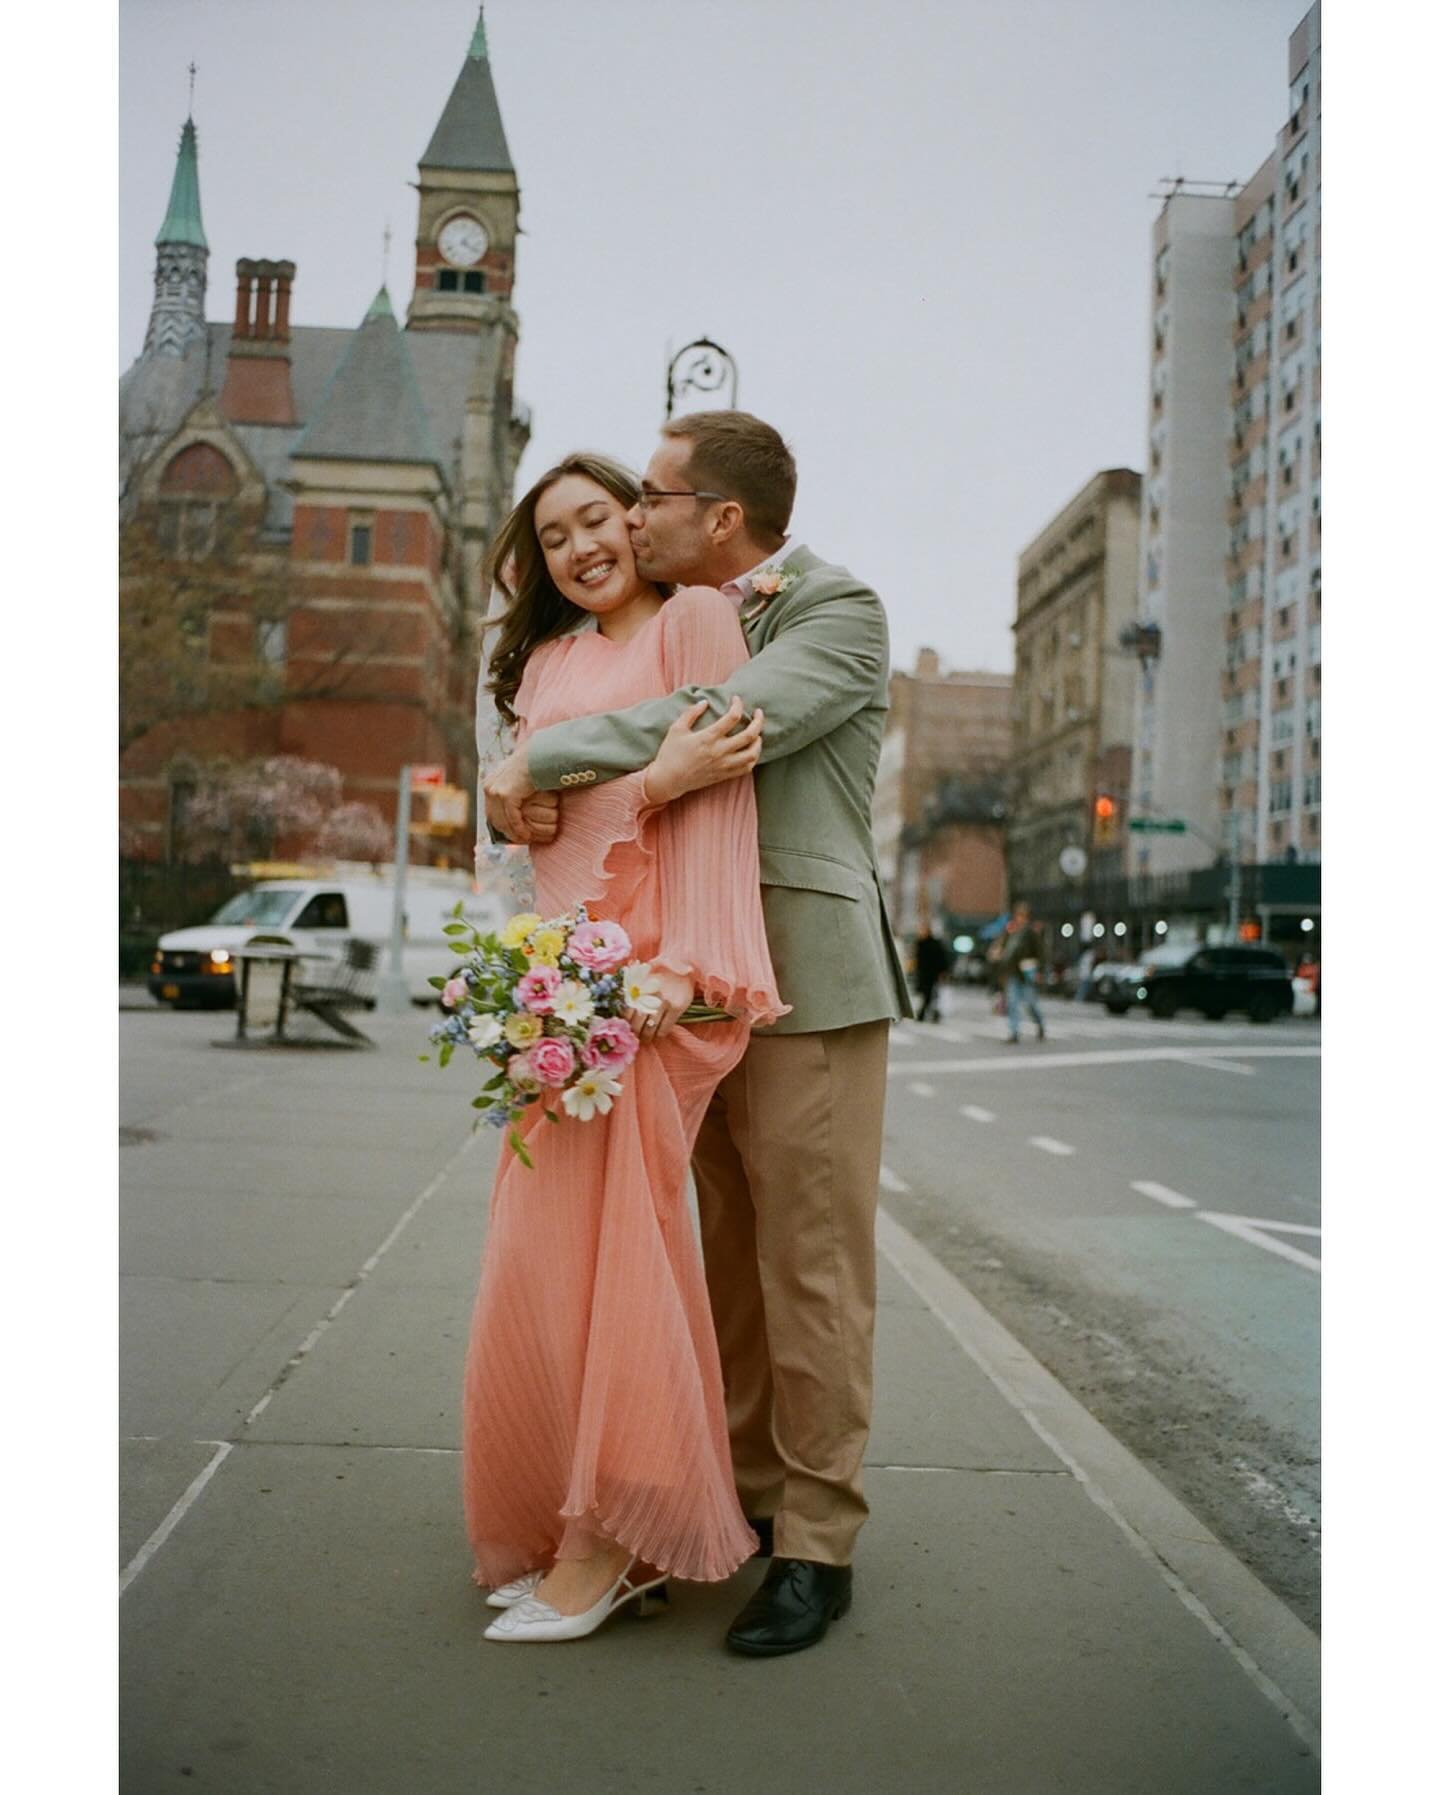 Highly recommend getting eloped in West Village 10/10 🌹🌷🌸🌺🪻🎞️ #35mm